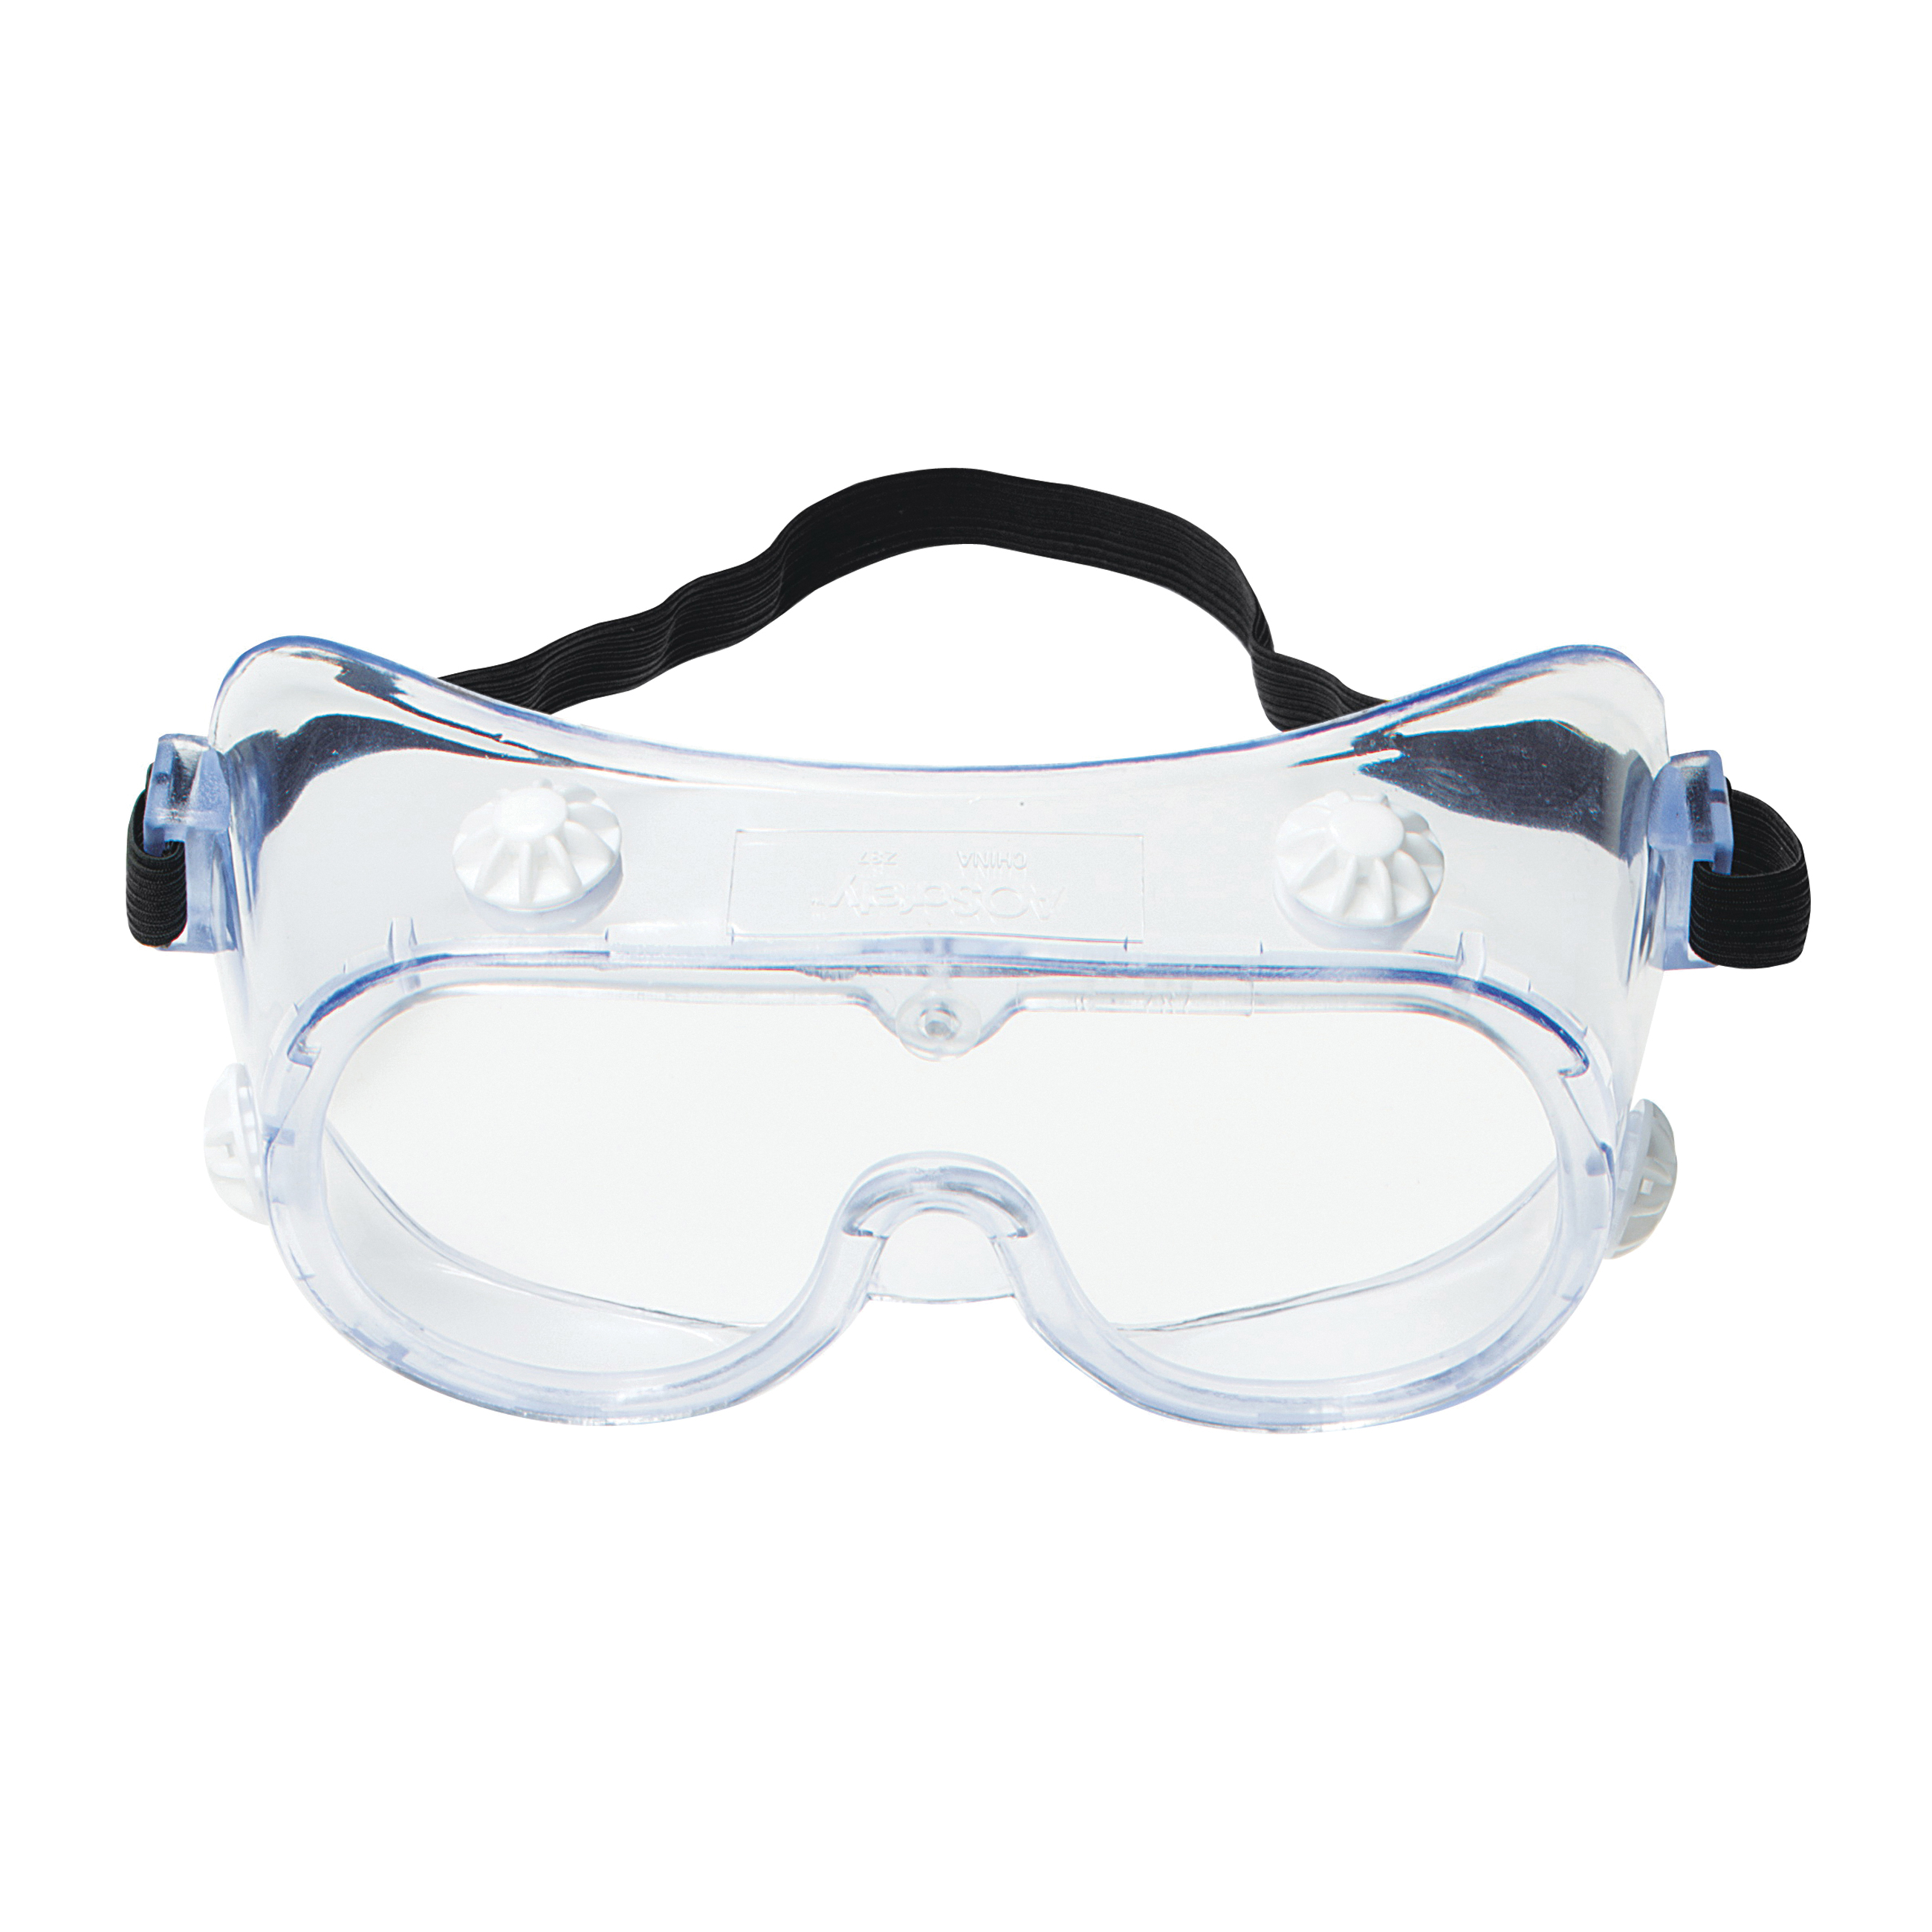 3M™ 078371-62139 Economy Indirect Vent Standard Safety Goggles, Uncoated Clear Polycarbonate Lens, 99.9 % UV Protection, Elastic Strap, ANSI Z87.1-2003